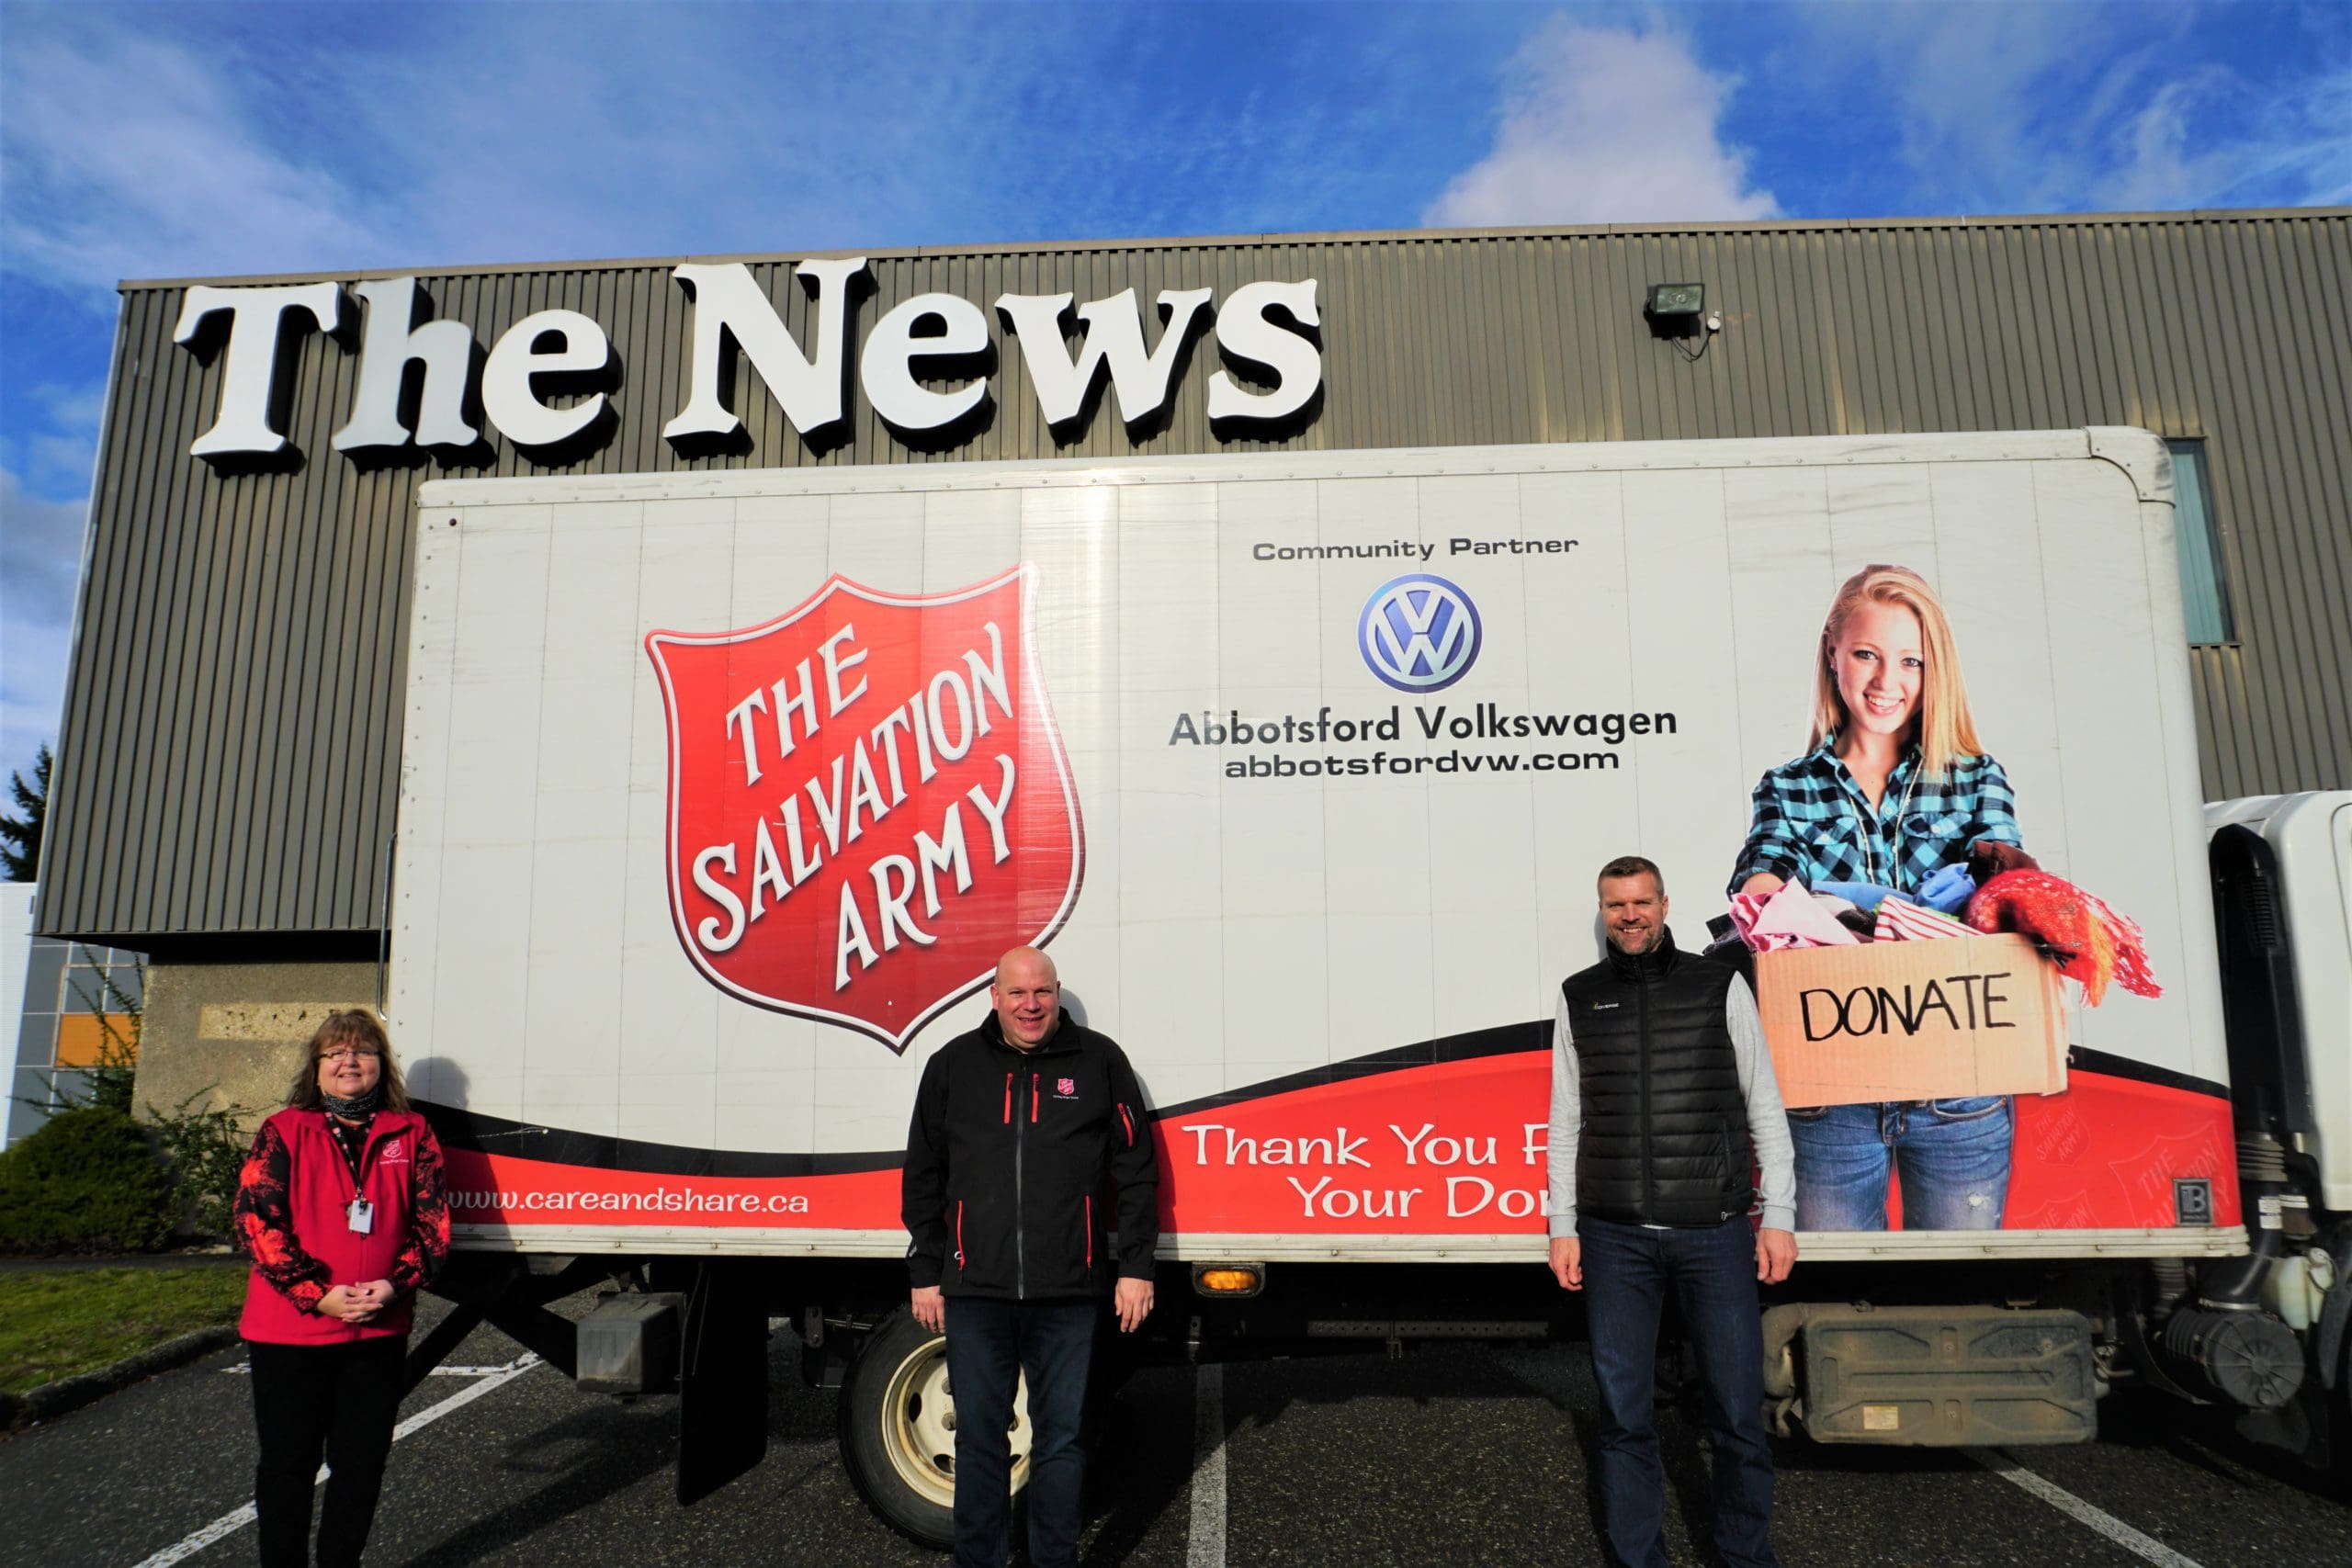 Diverse Properties Partners with The Salvation Army